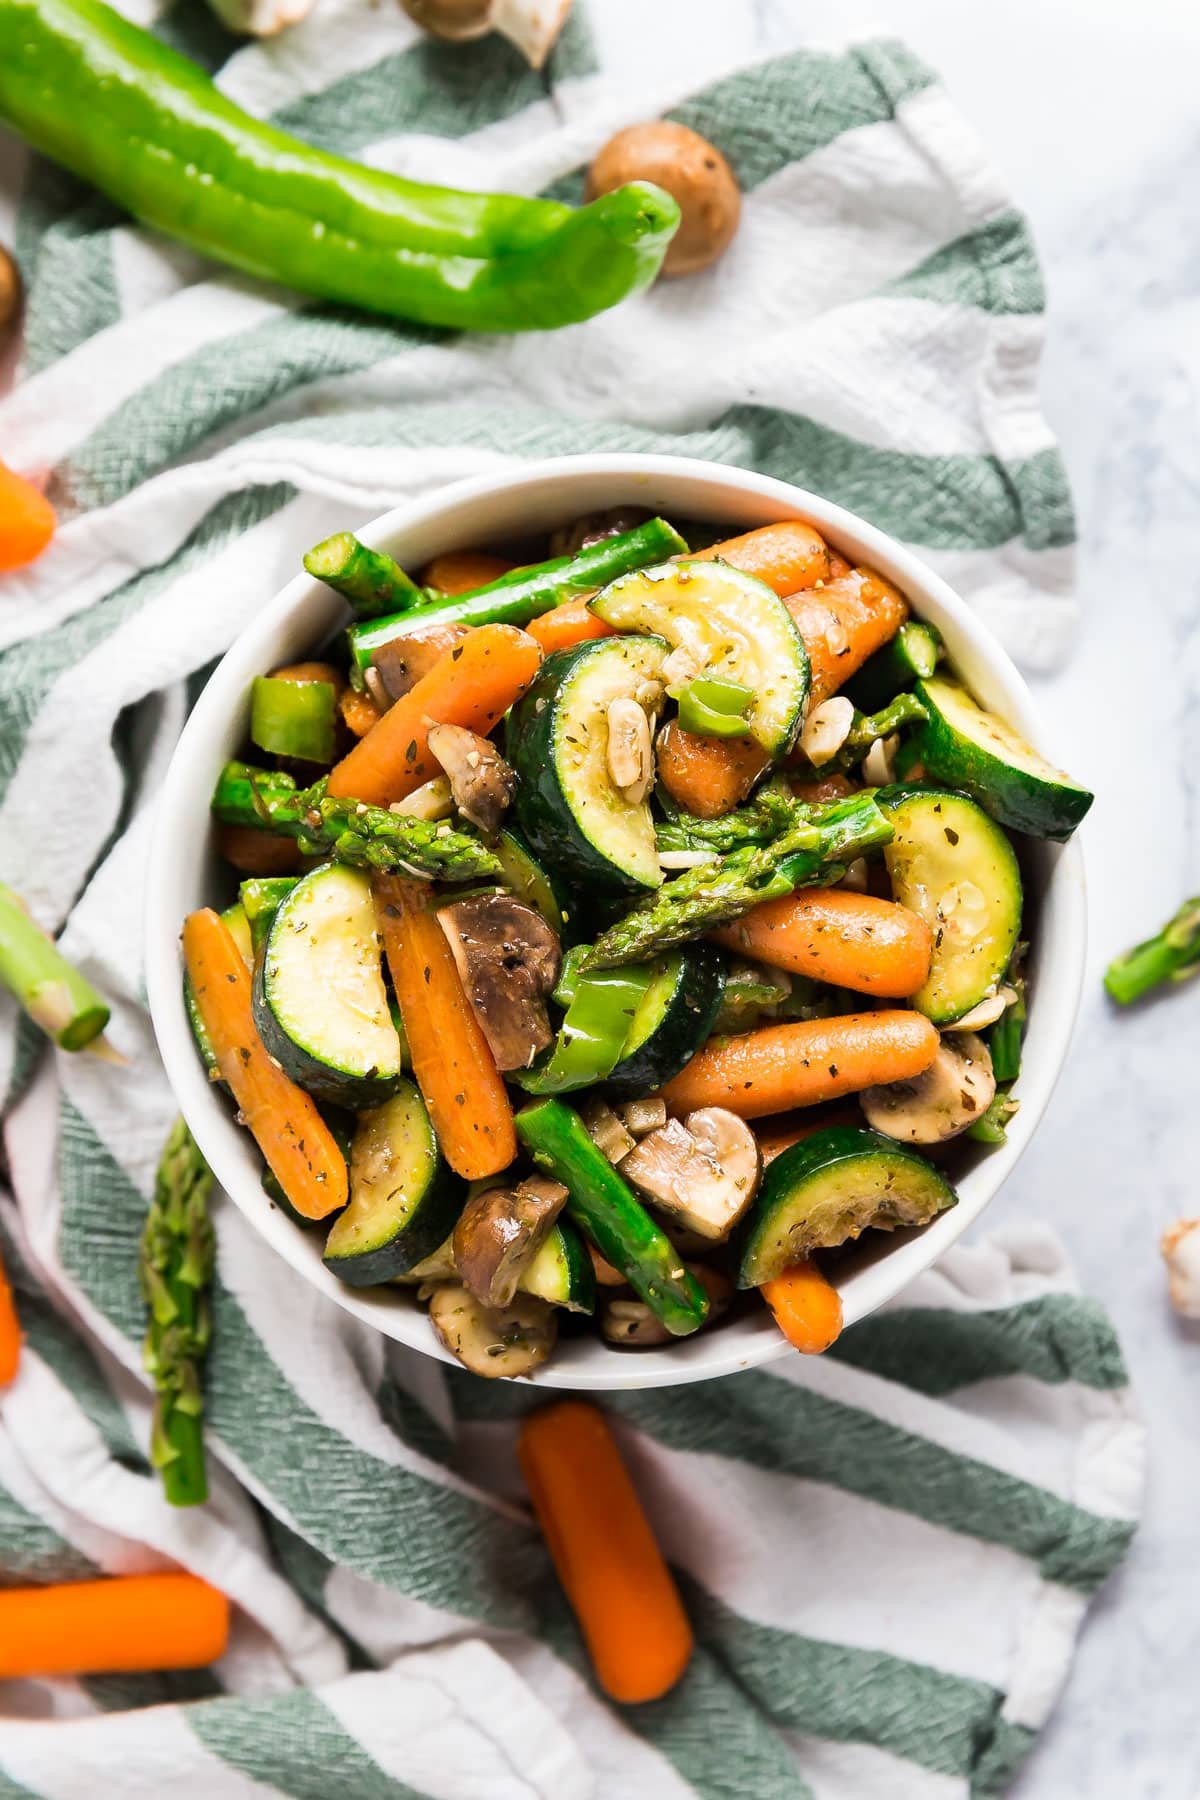 An overhead image of a bowl of sautéed veggies on top of a green and white striped towel with raw veggies around it.